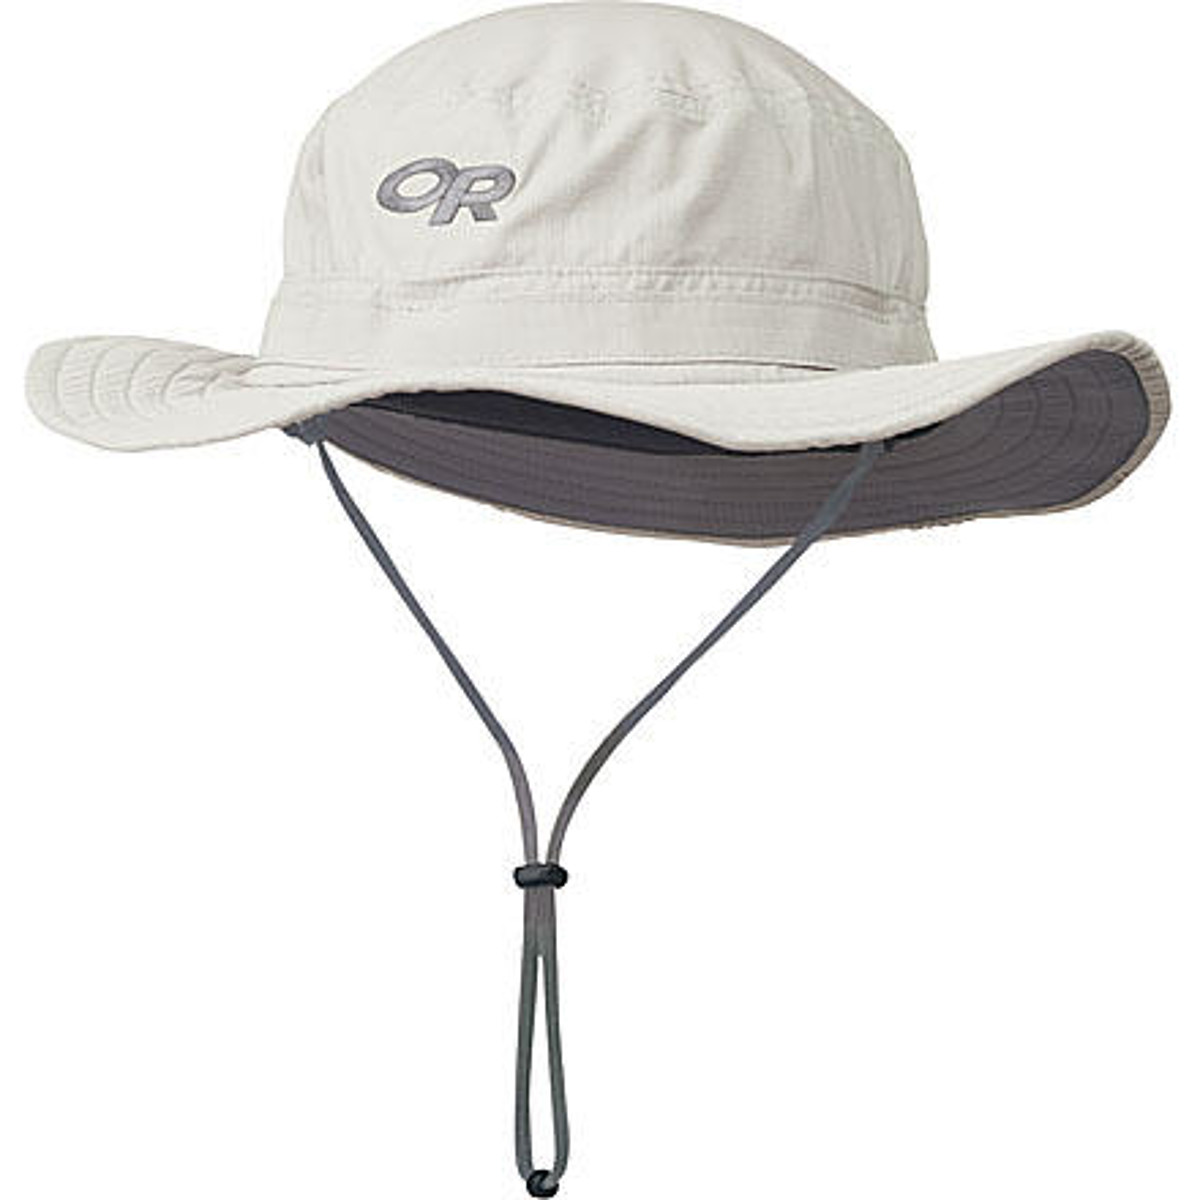 Outdoor Research Helios Sun Hat Reviews - Trailspace